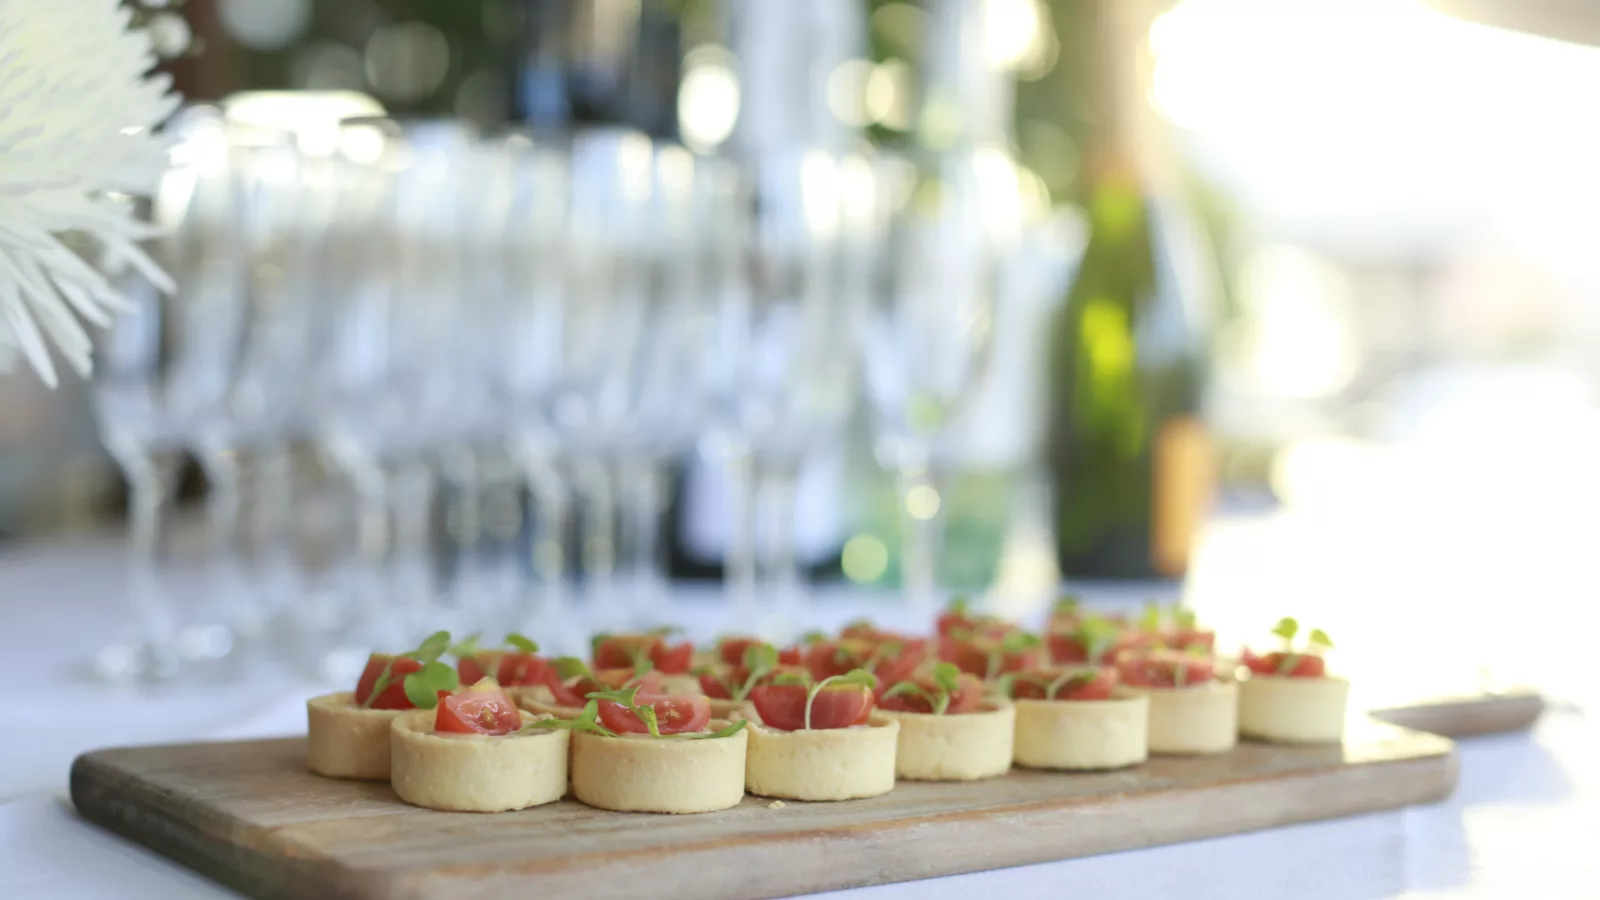 Selection of mini quiches served on a wooden board on a table with a white table cloth and champagne flutes in the background